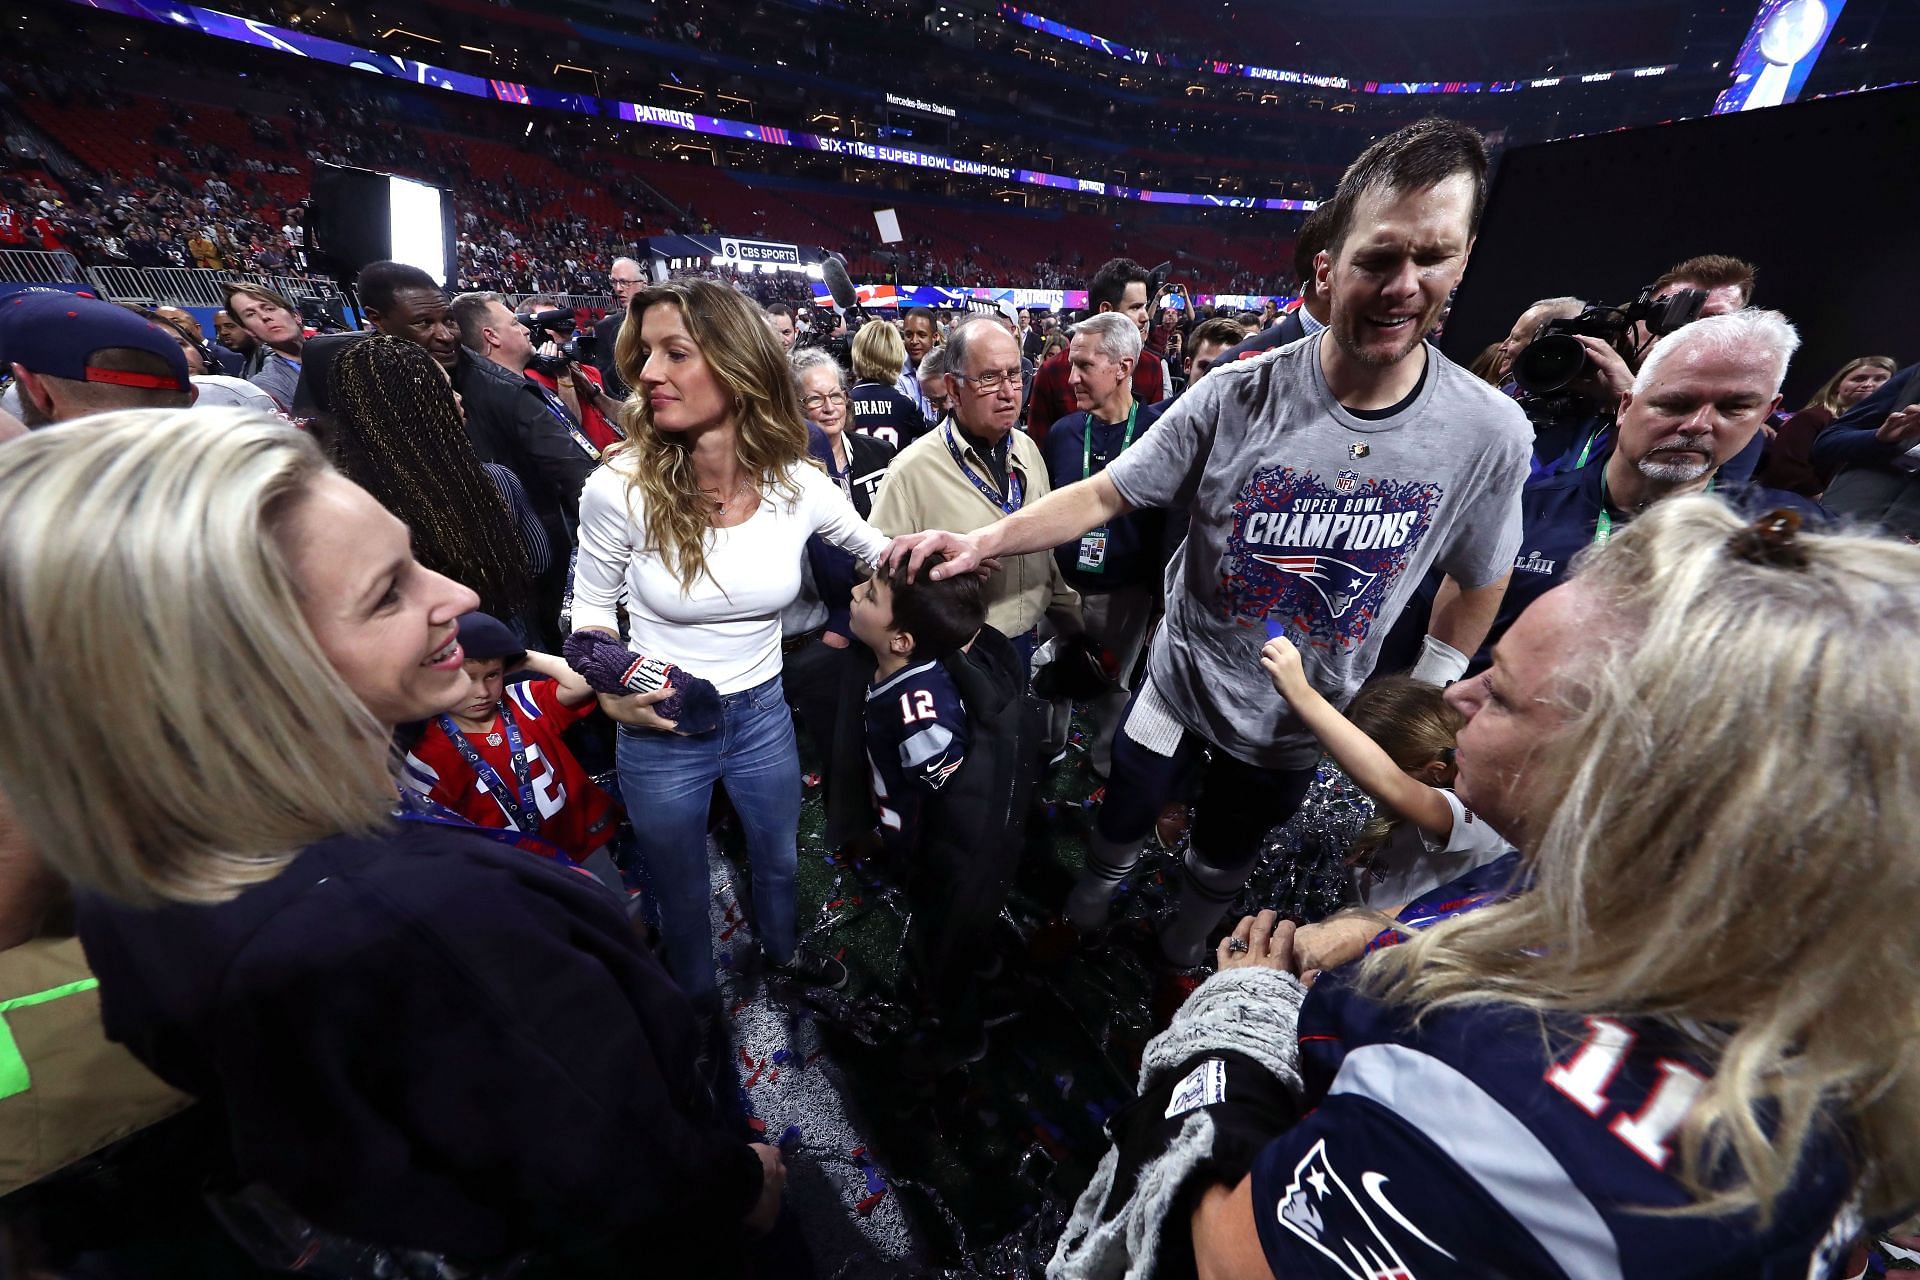 Tom Brady and Gisele at the Super Bowl LIII - New England Patriots v Los Angeles Rams game